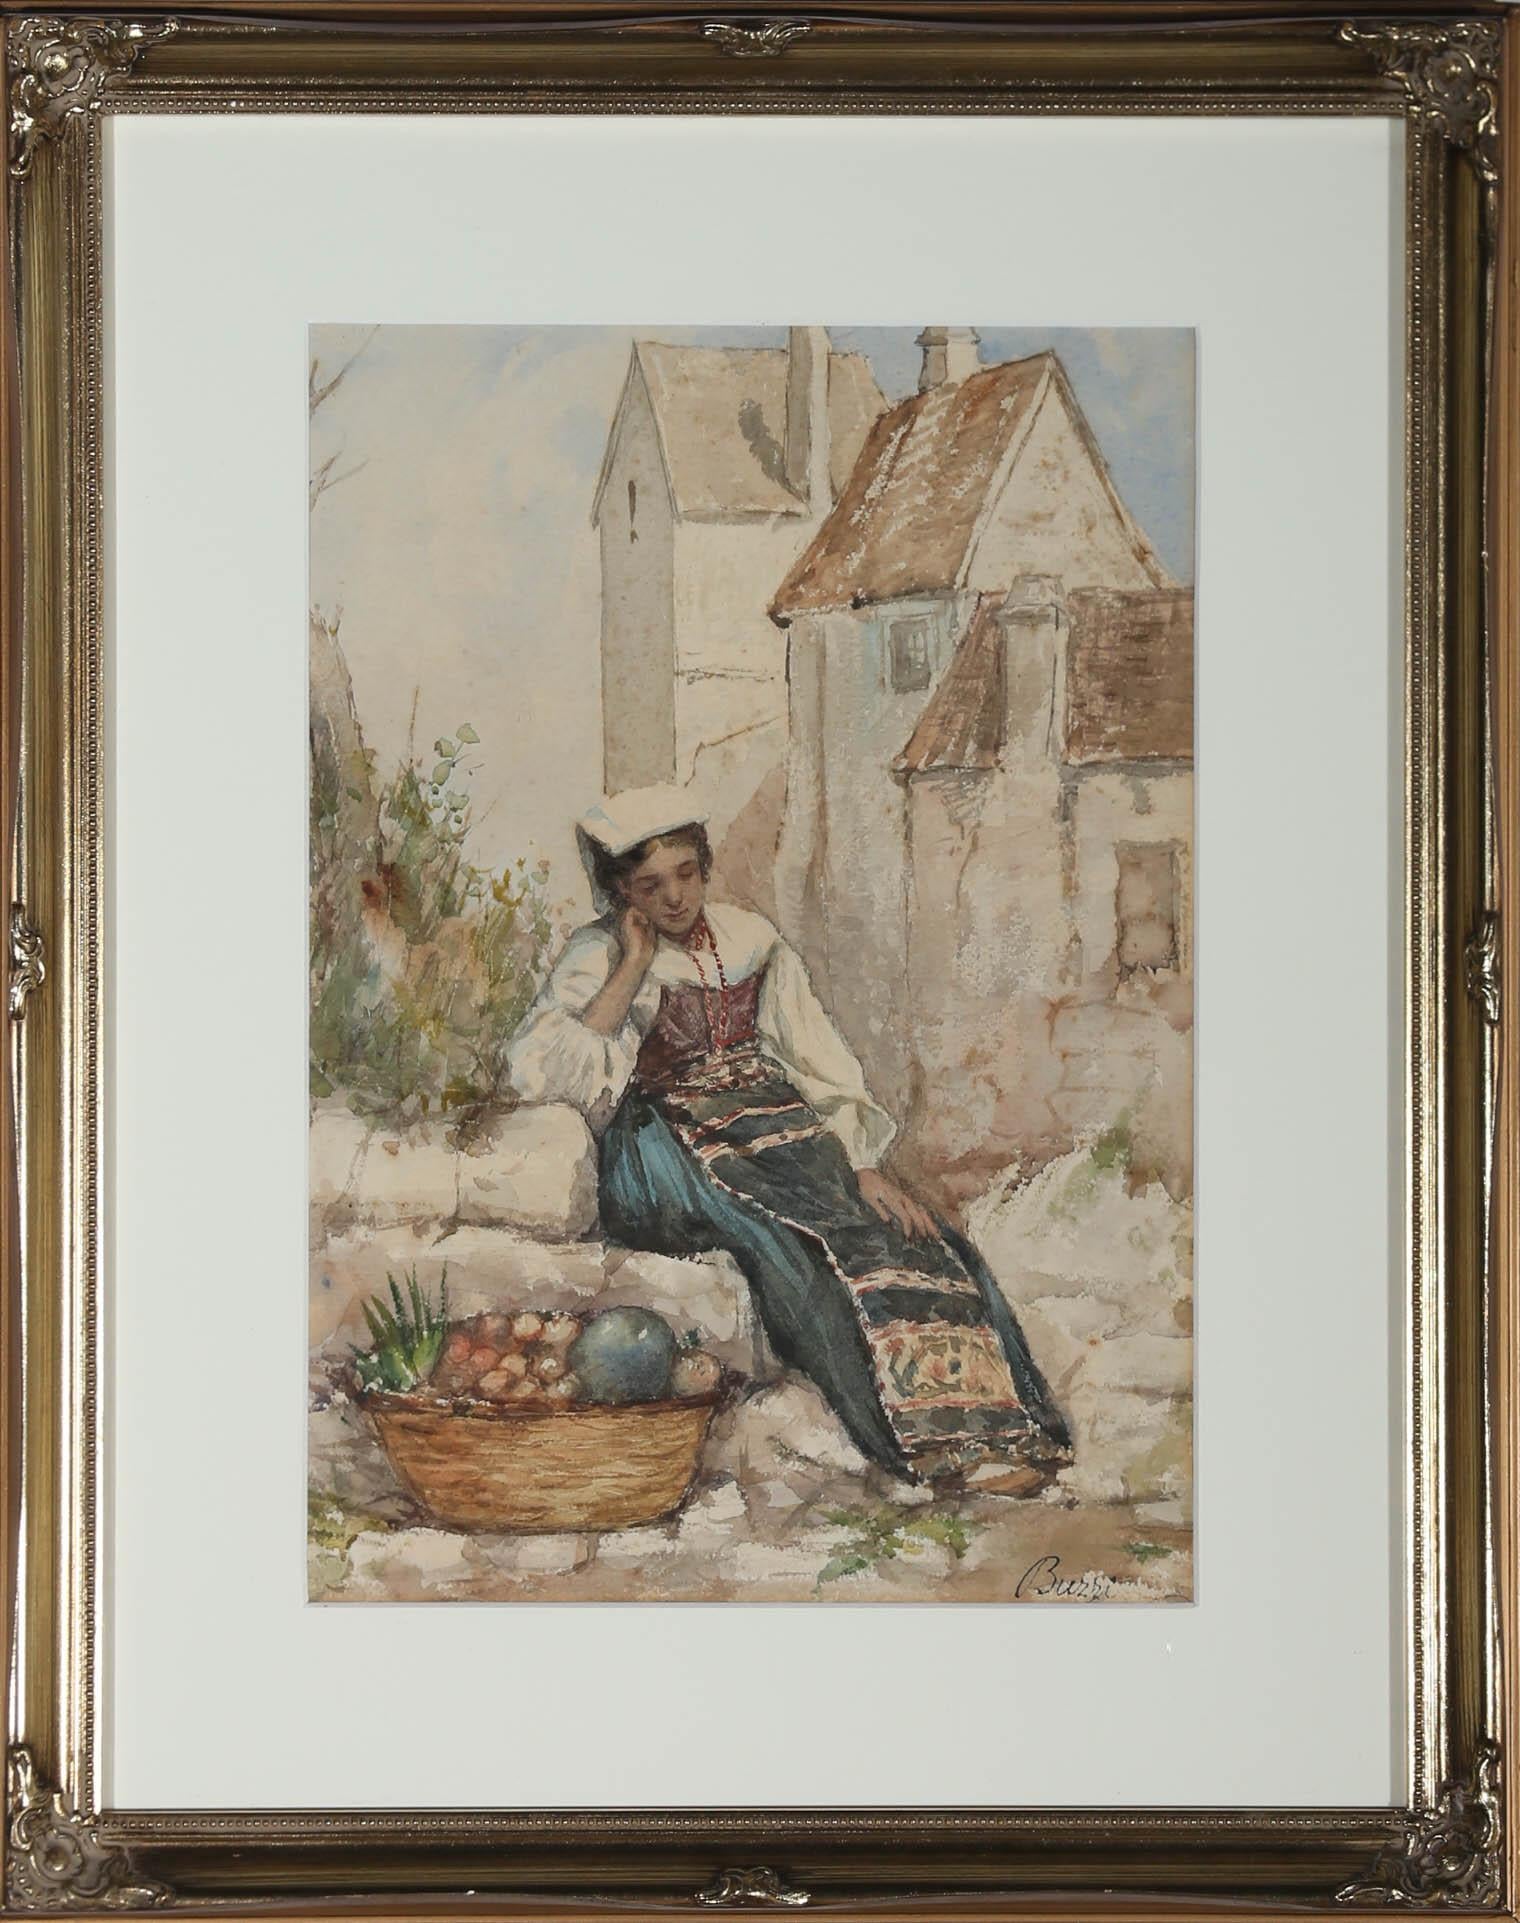 A wonderful 19th century watercolor by Italian artist Achille Buzzi, depicting a woman resting on stone steps after an impressive morning harvest. The women has been caught in delicate detail, staring down at her full and heavy basket of homegrown